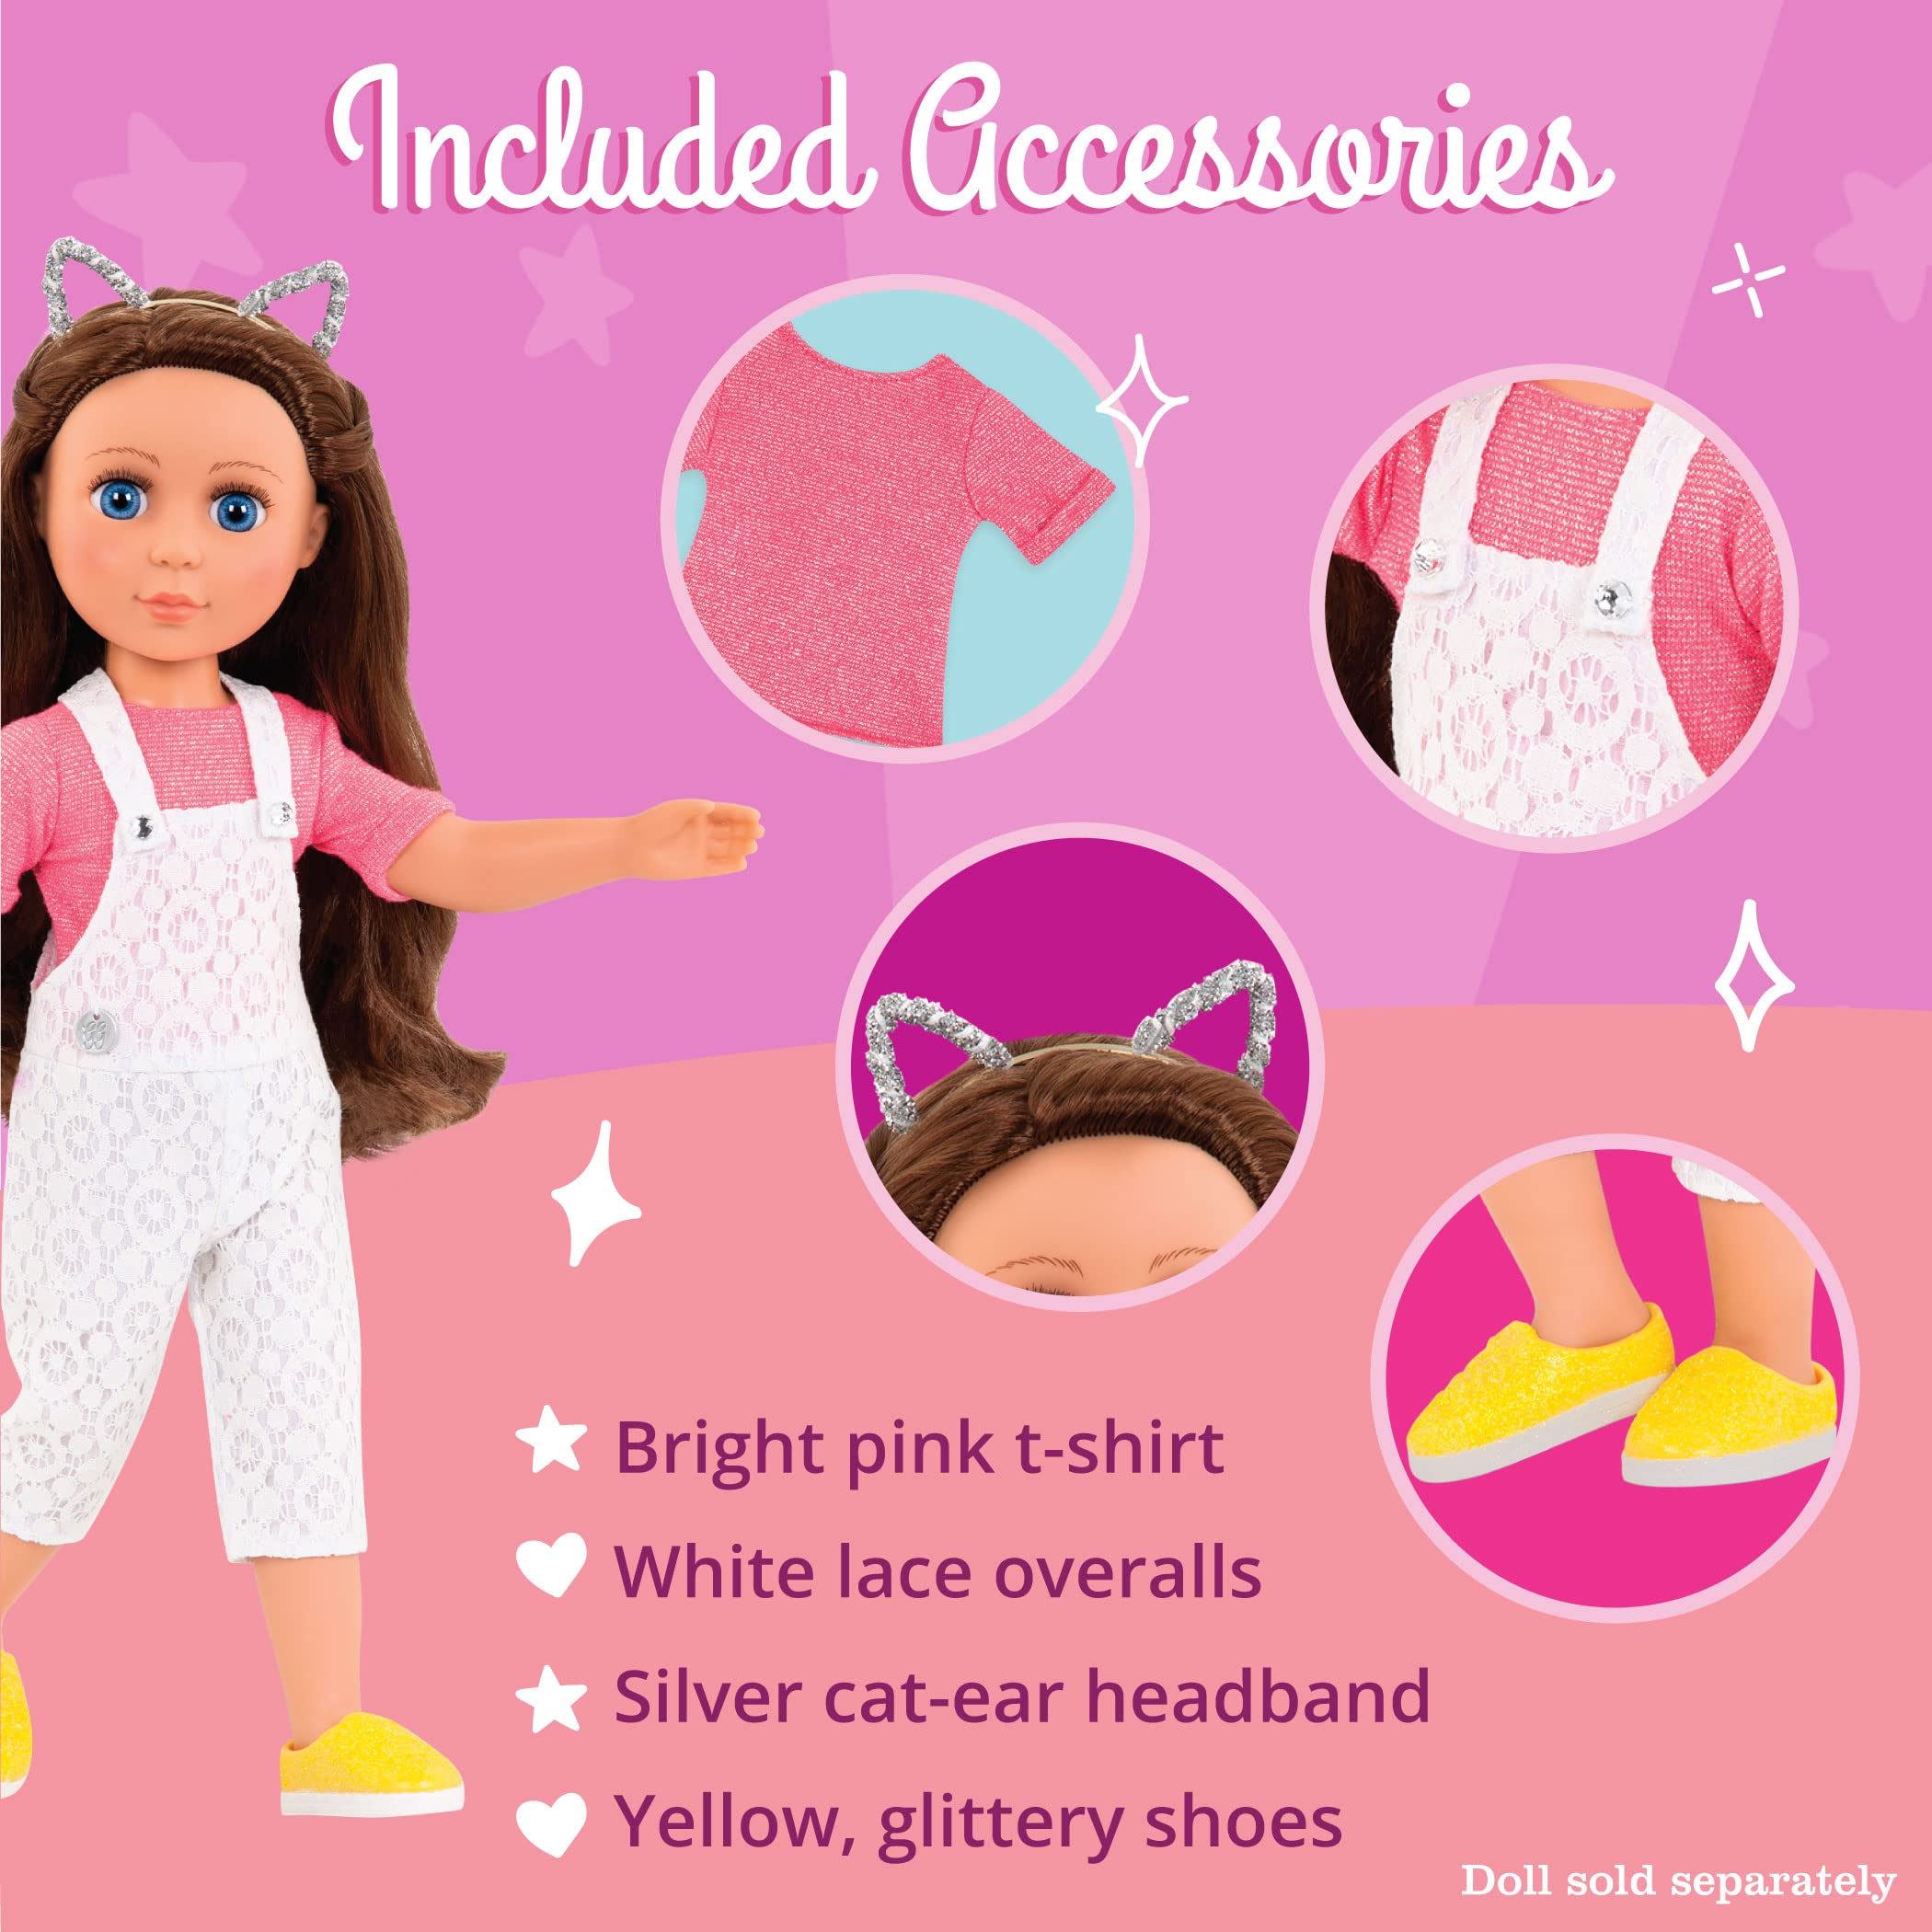 Glitter Girls – Glisten & Glam - Lace Overalls & Cat Ear Deluxe Outfit - 14-inch Doll Clothes– Toys, Clothes & Accessories For Girls 3-Year-Old & Up, includes Top (1)